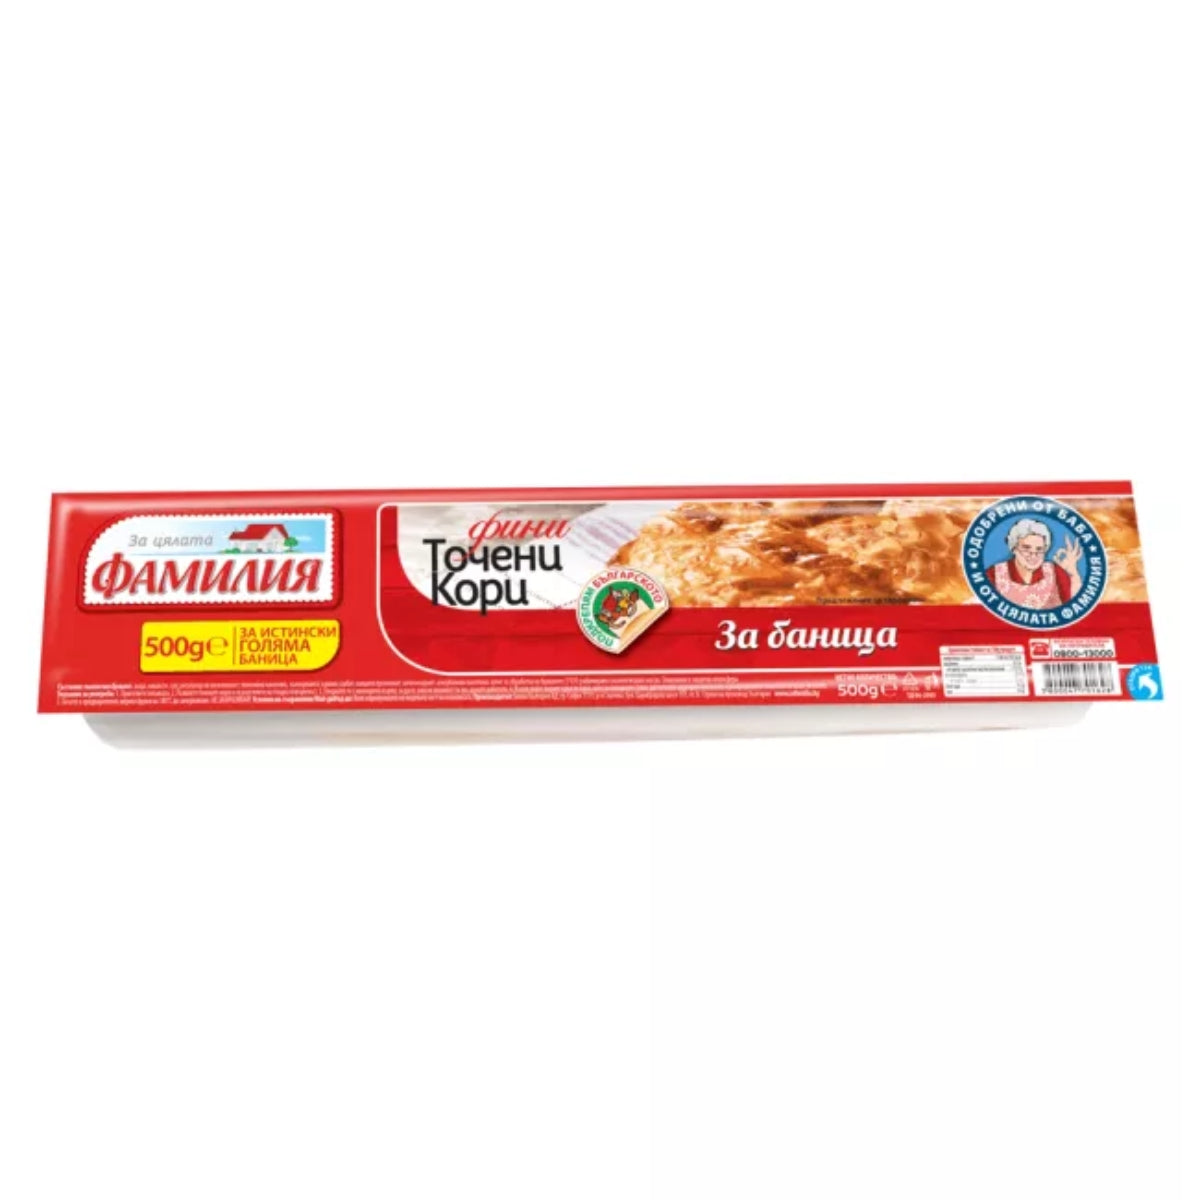 A box with a box of Damunur - Puff Pastry Sheets (Yufka) - 500g on a white background.